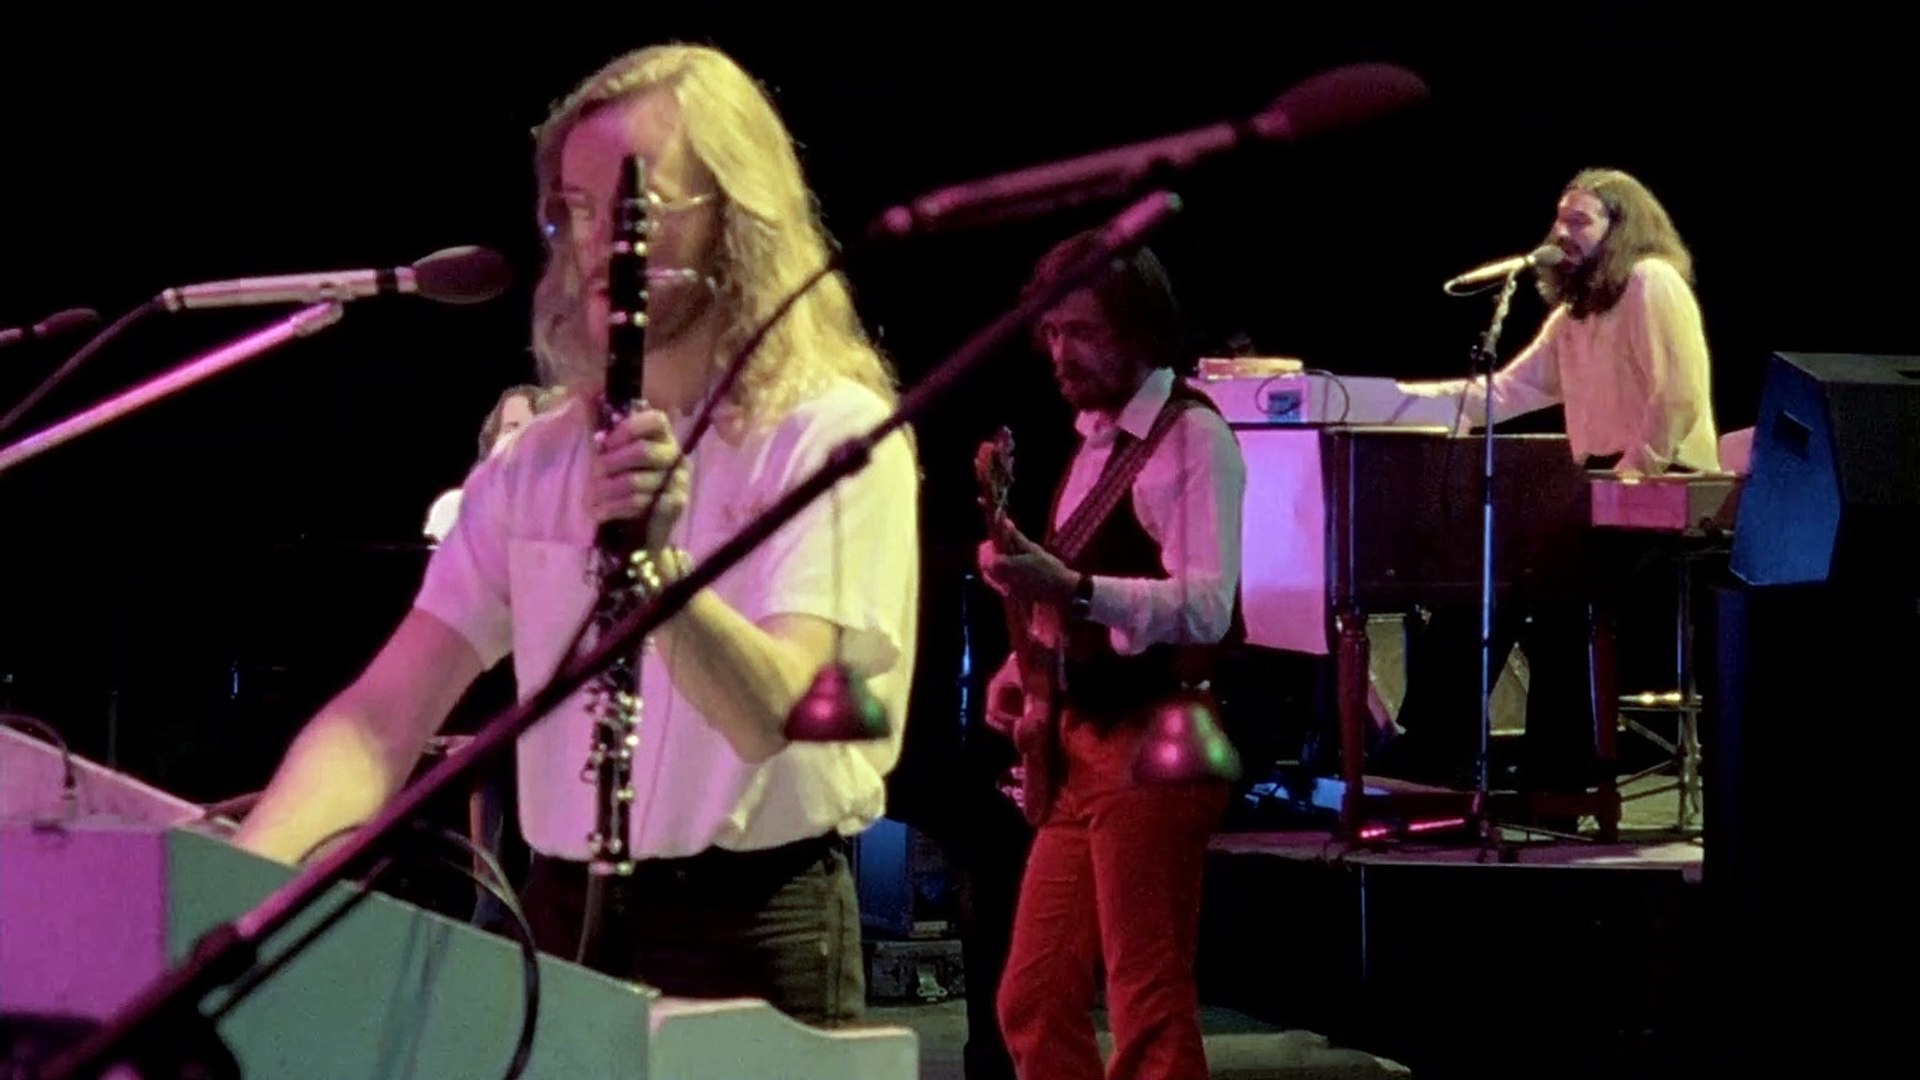 Take The Long Way Home - Supertramp (live) - video Dailymotion